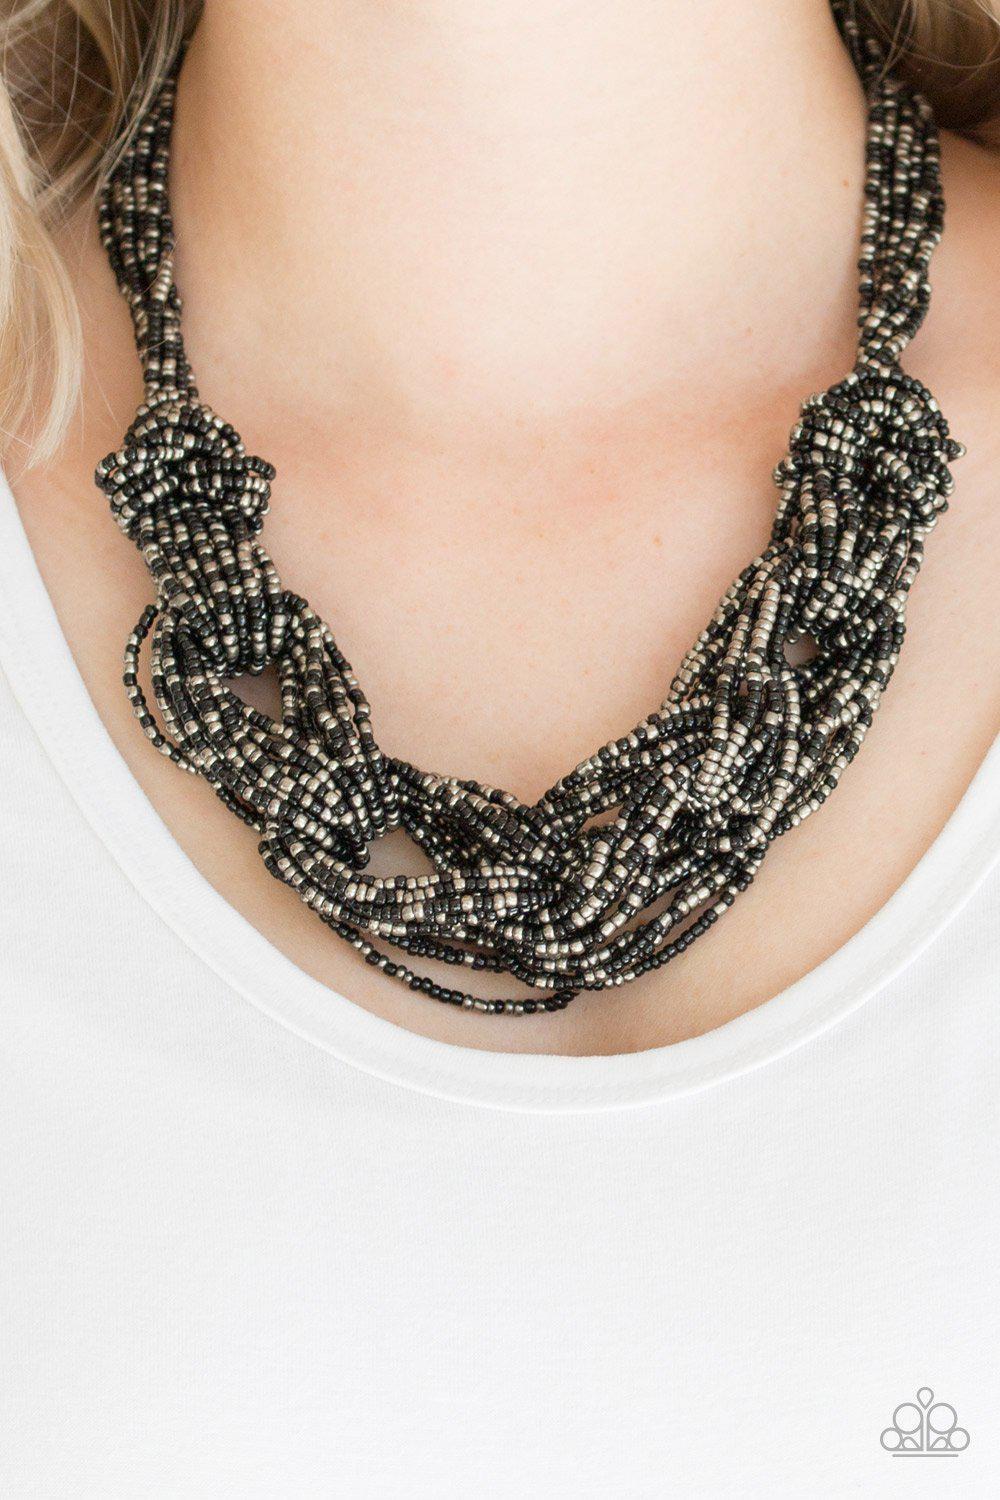 City Catwalk Black and Gunmetal Seed Bead Necklace - Paparazzi Accessories-CarasShop.com - $5 Jewelry by Cara Jewels